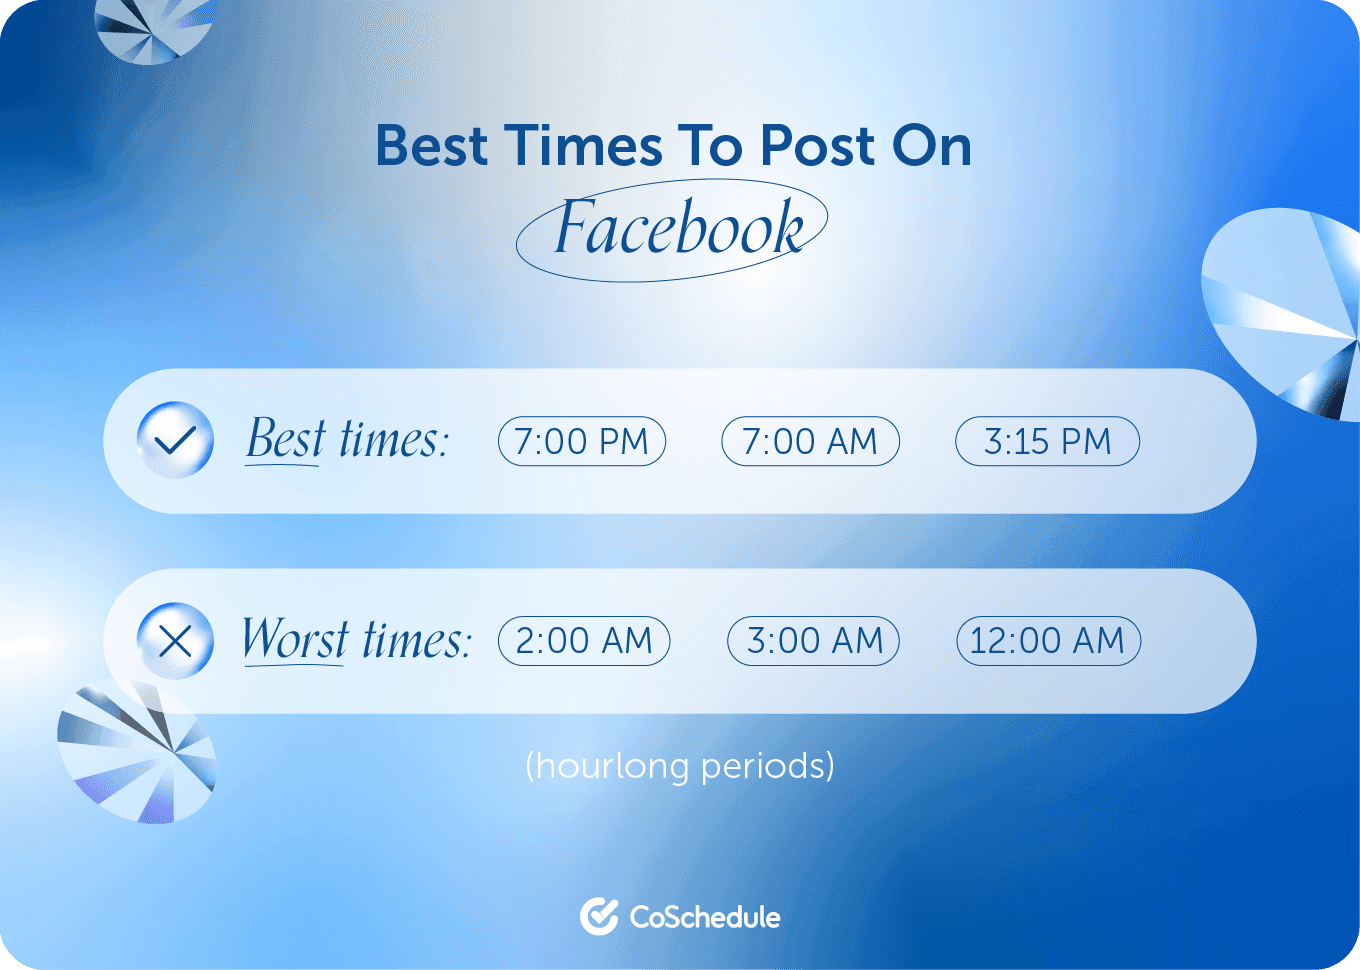 Best and worst times to post on Facebook